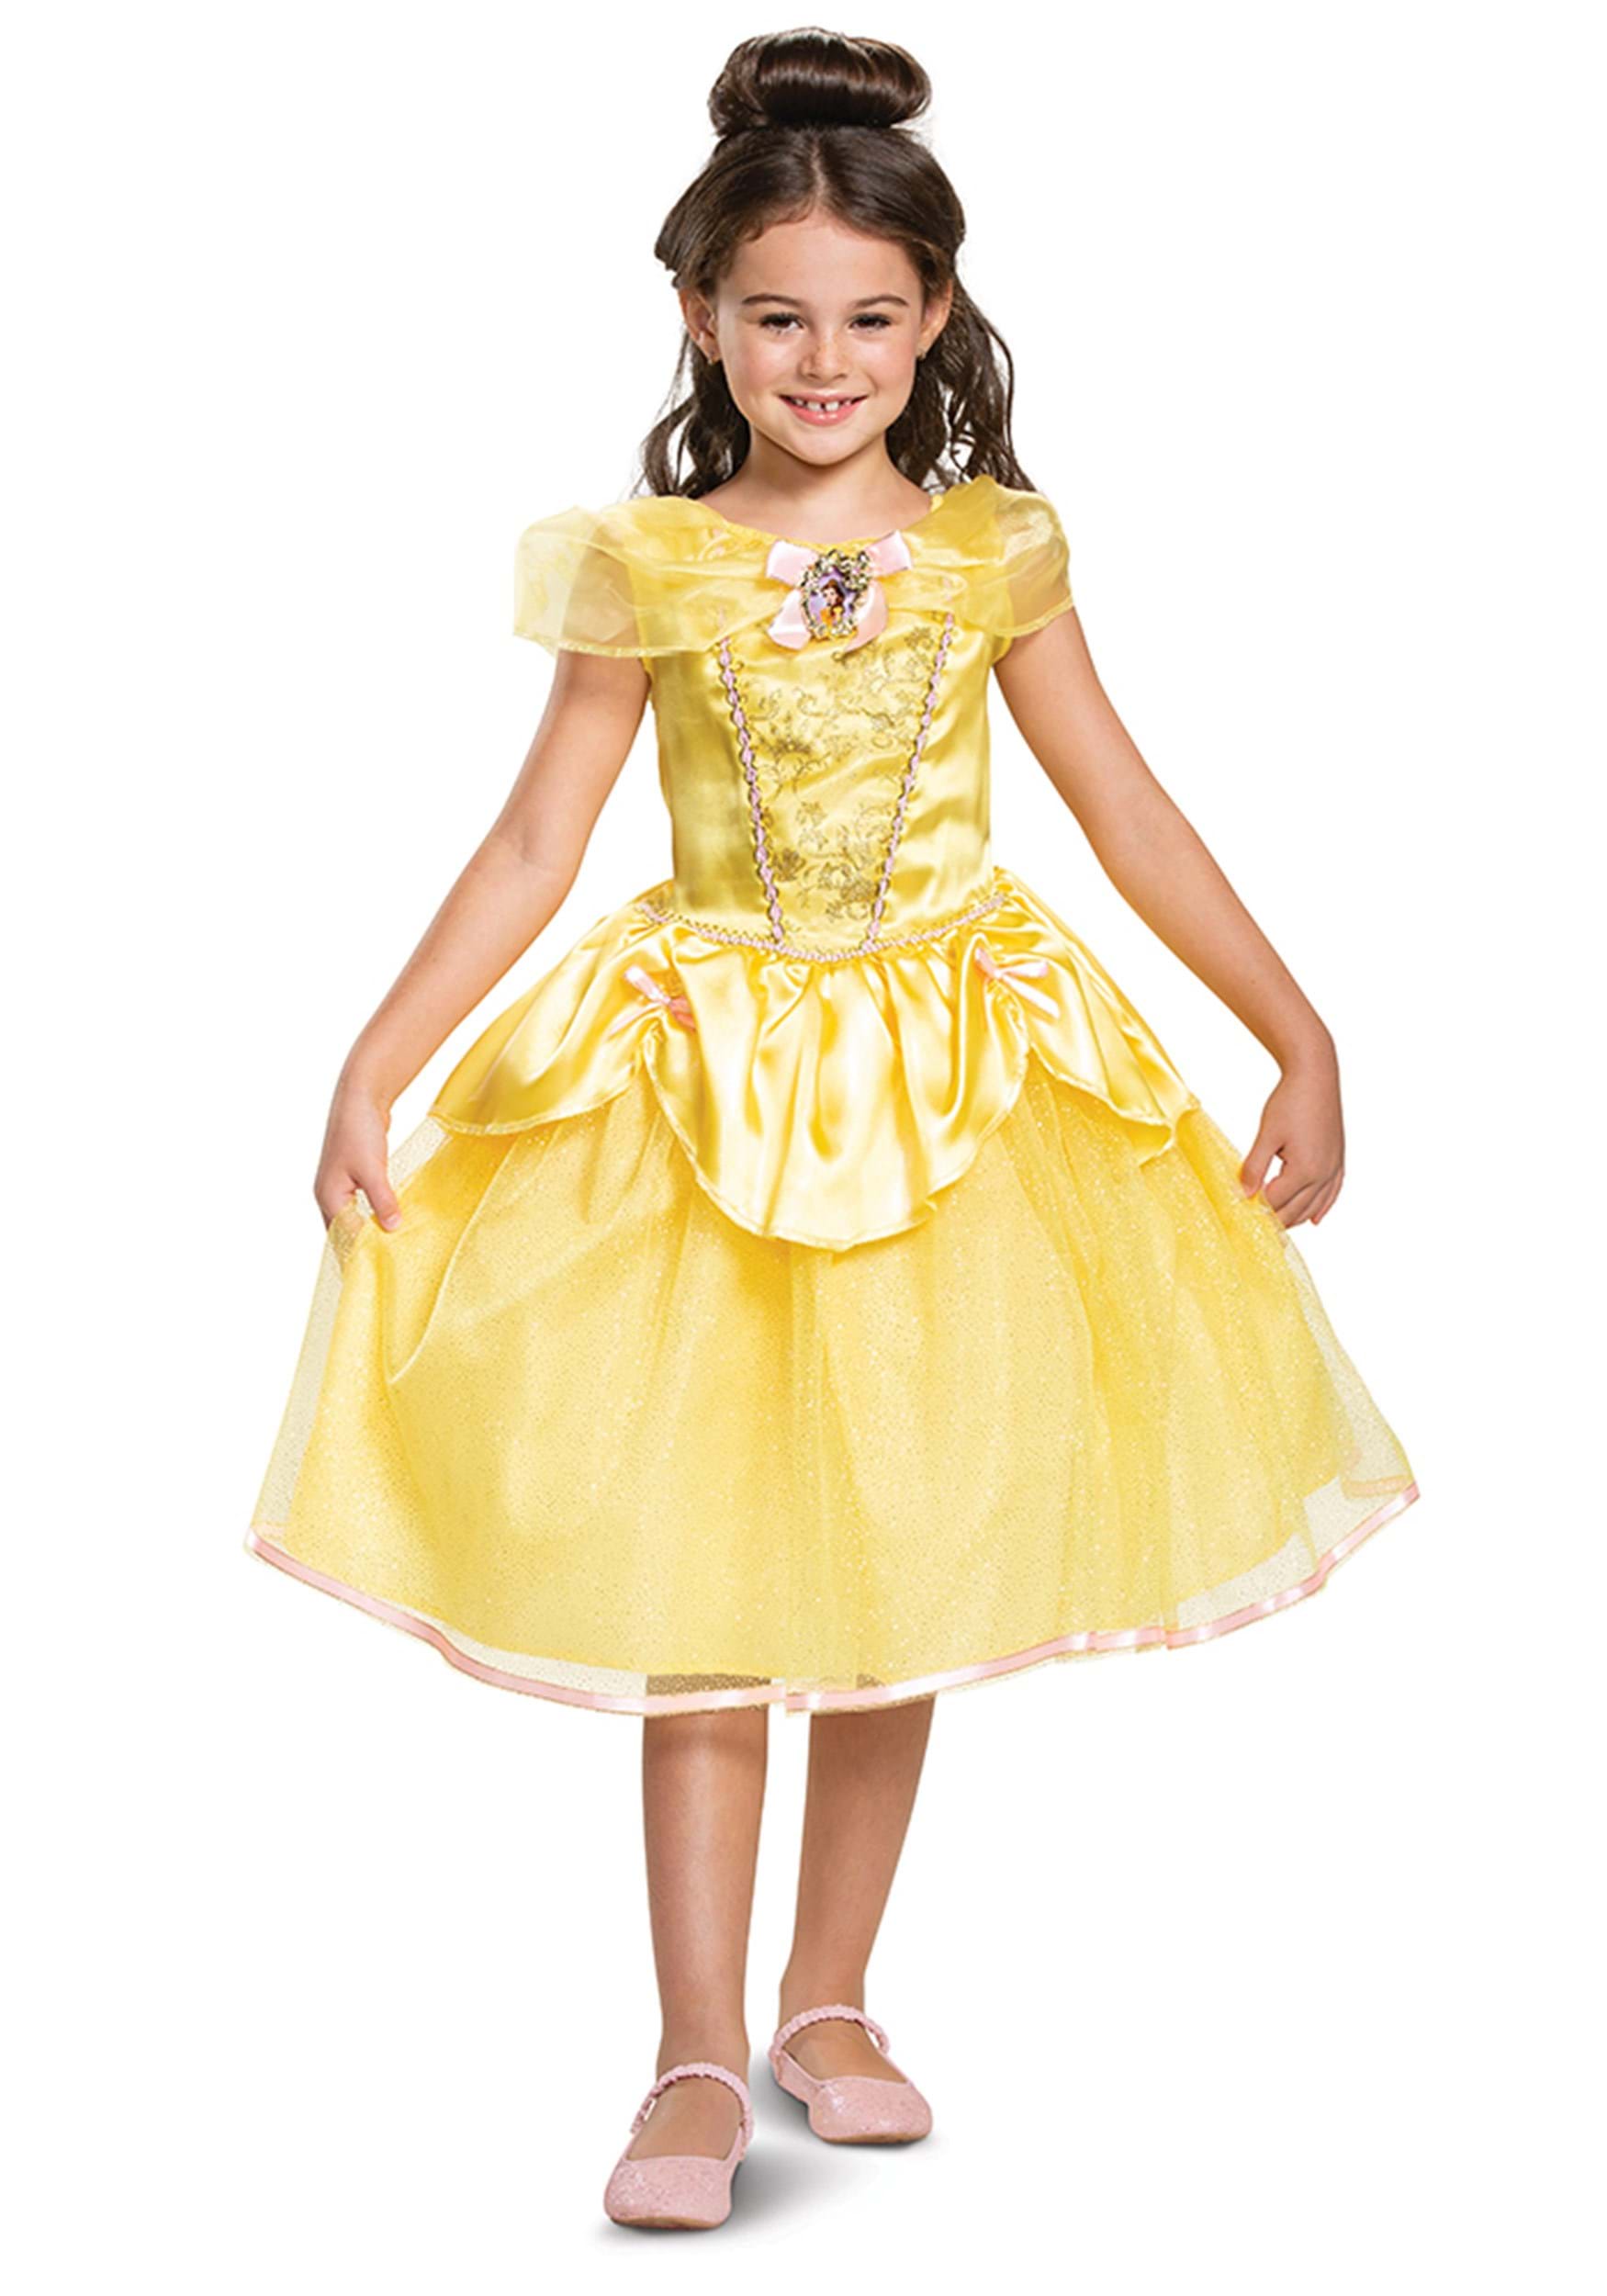 Photos - Fancy Dress A&D Disguise Beauty and the Beast Belle Classic Girl's Costume | Girl's Disney 